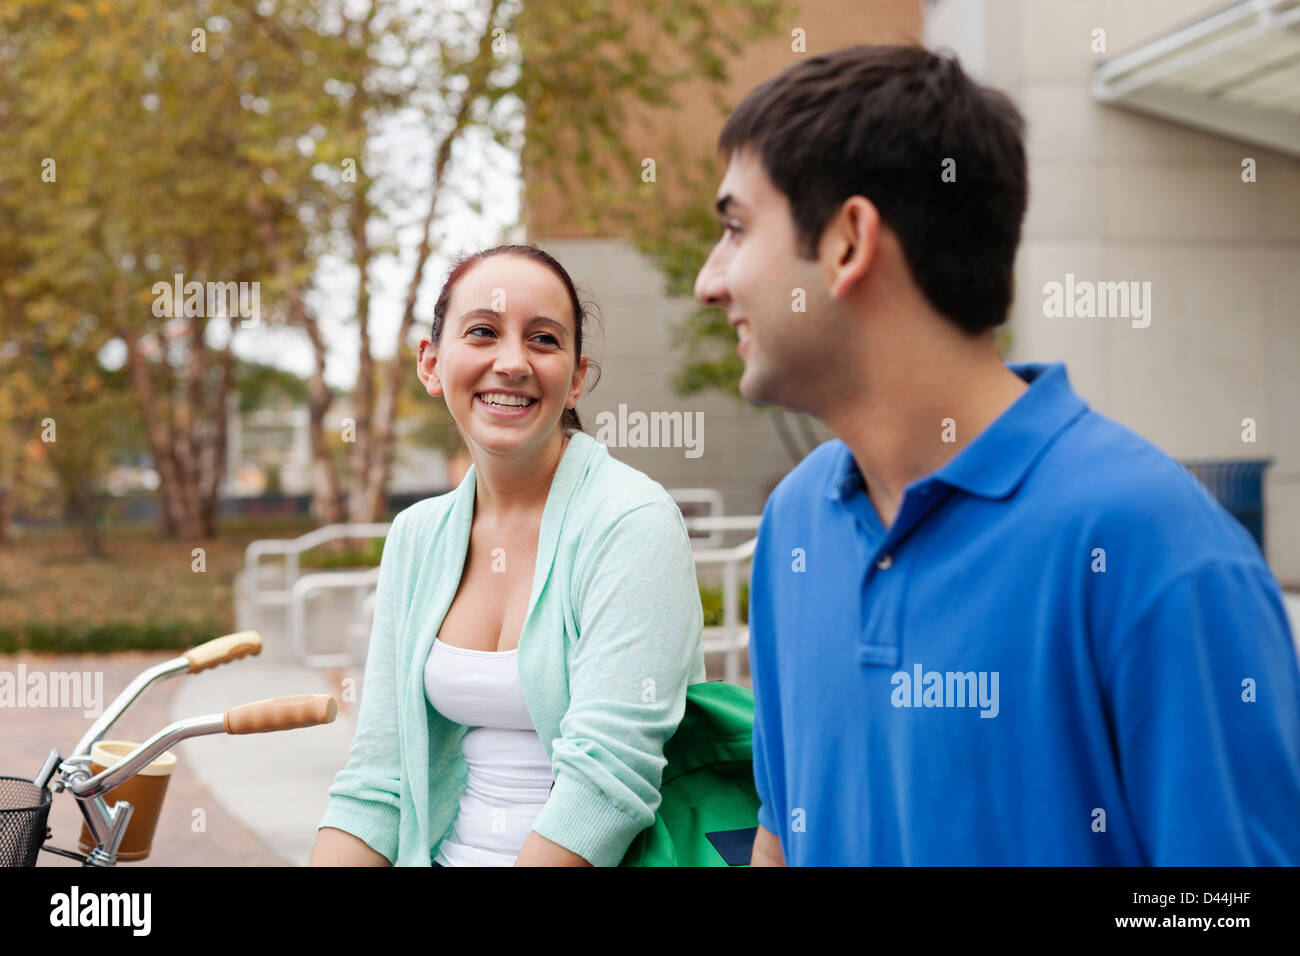 Smiling students talking on campus Banque D'Images